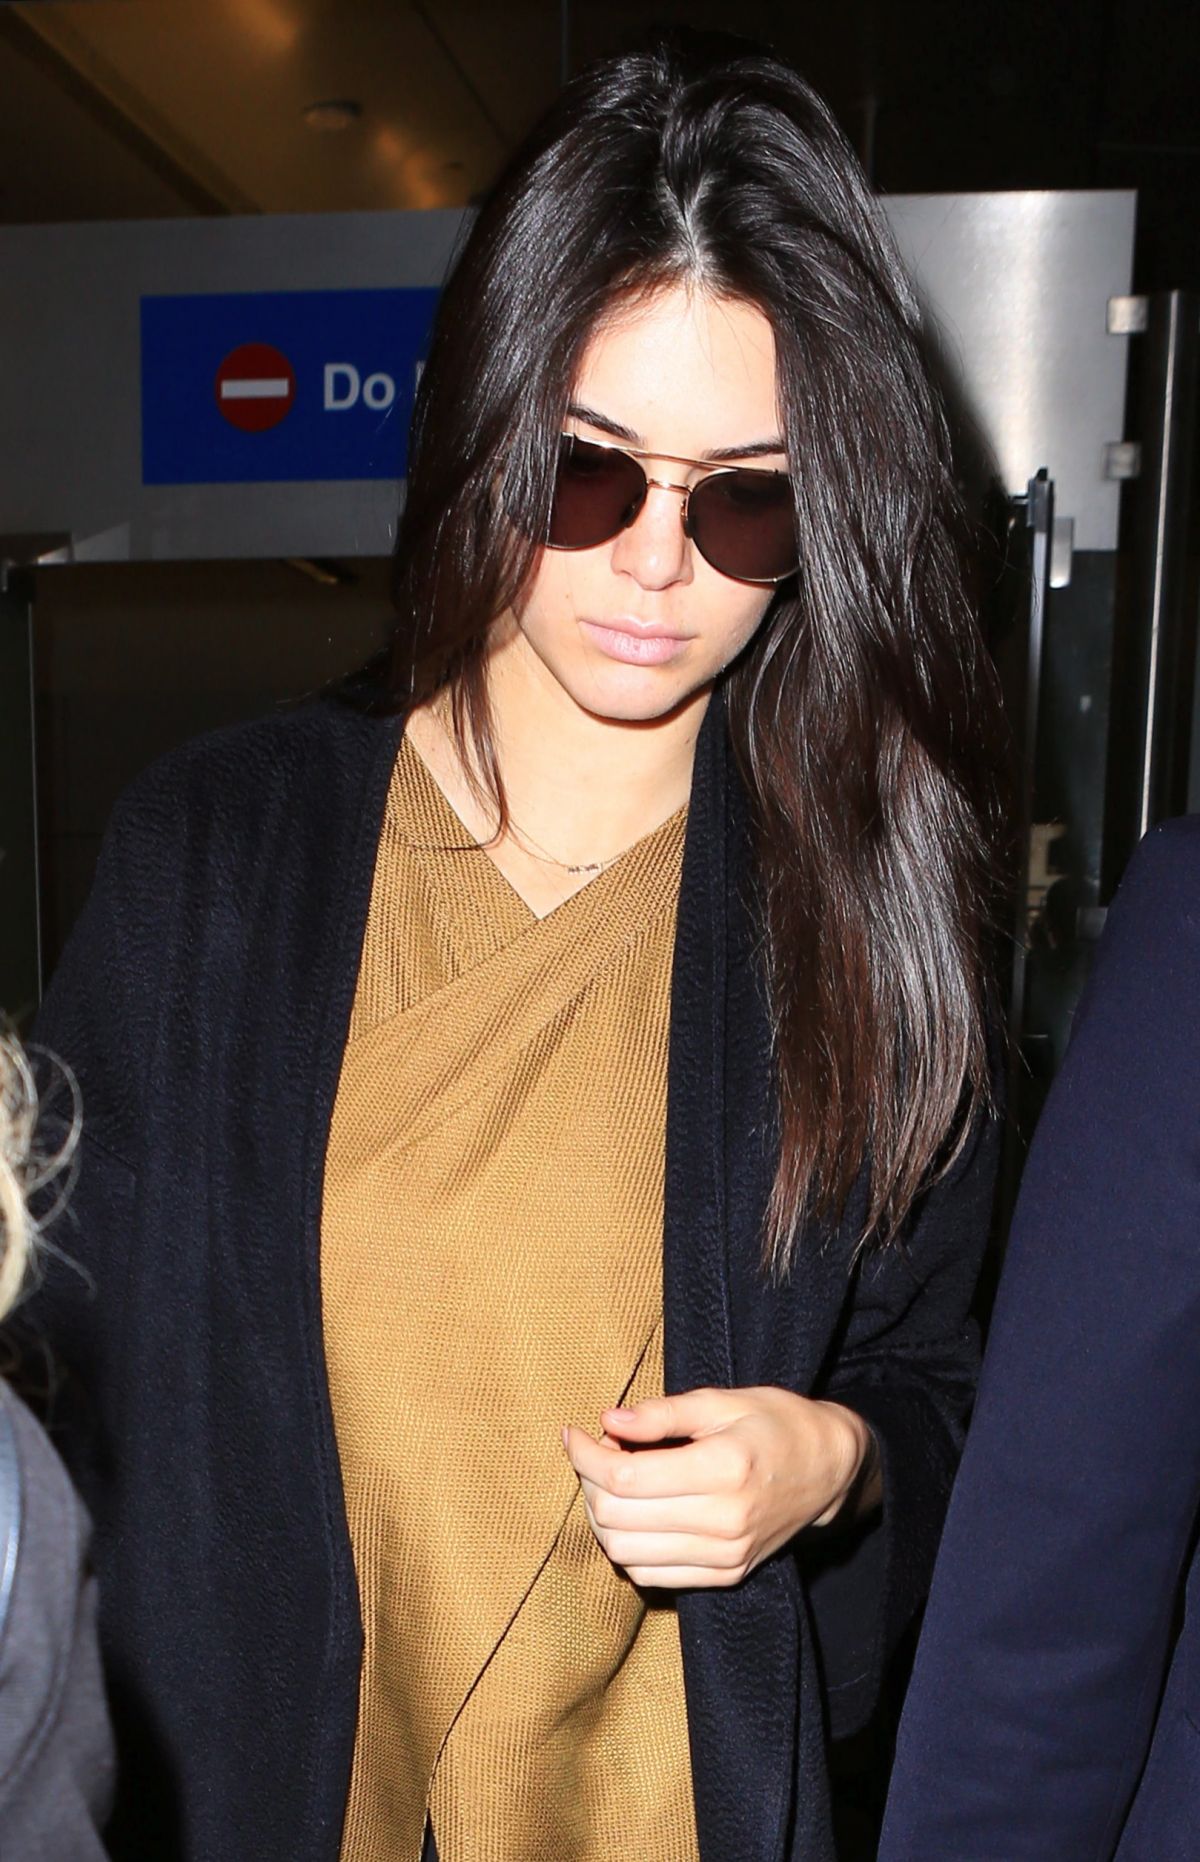 KENDALL JENNER at Los Angeles International Airport 01/29/2016 – HawtCelebs